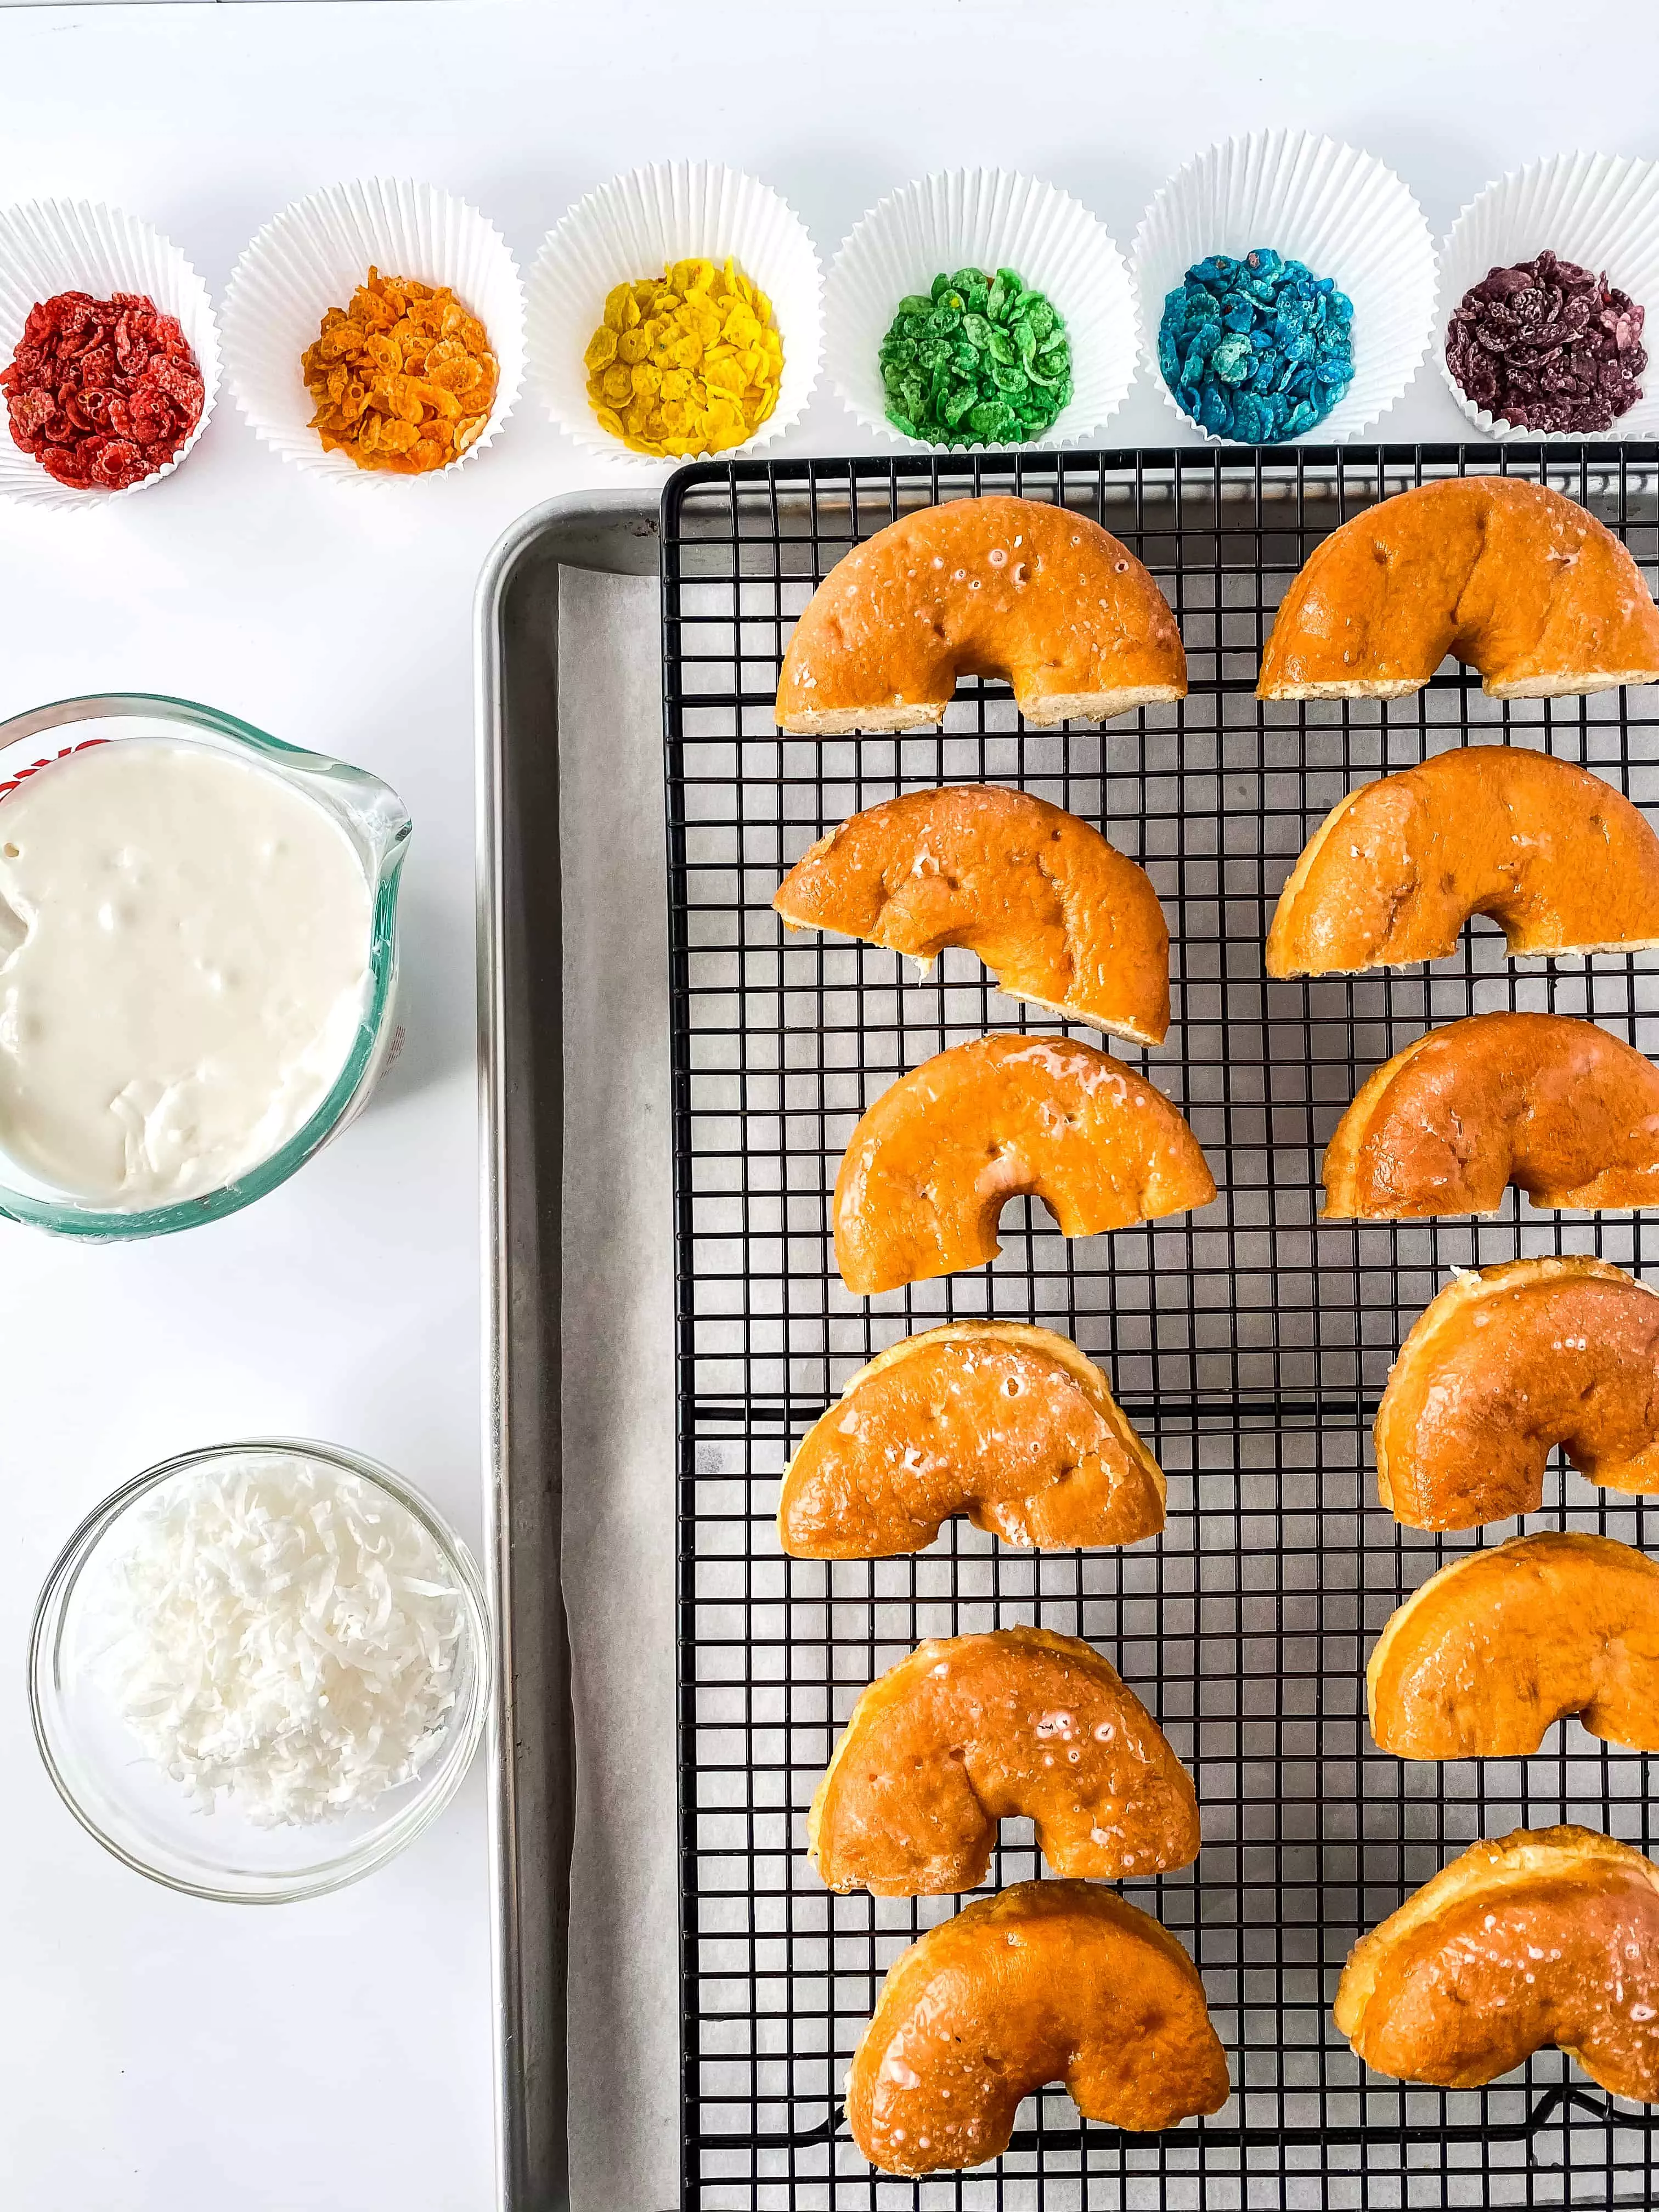 Ingredients for Rainbow Donuts! Make these fun donuts with fruity pebbles, white frosting, and coconut! They are SO easy to make that you